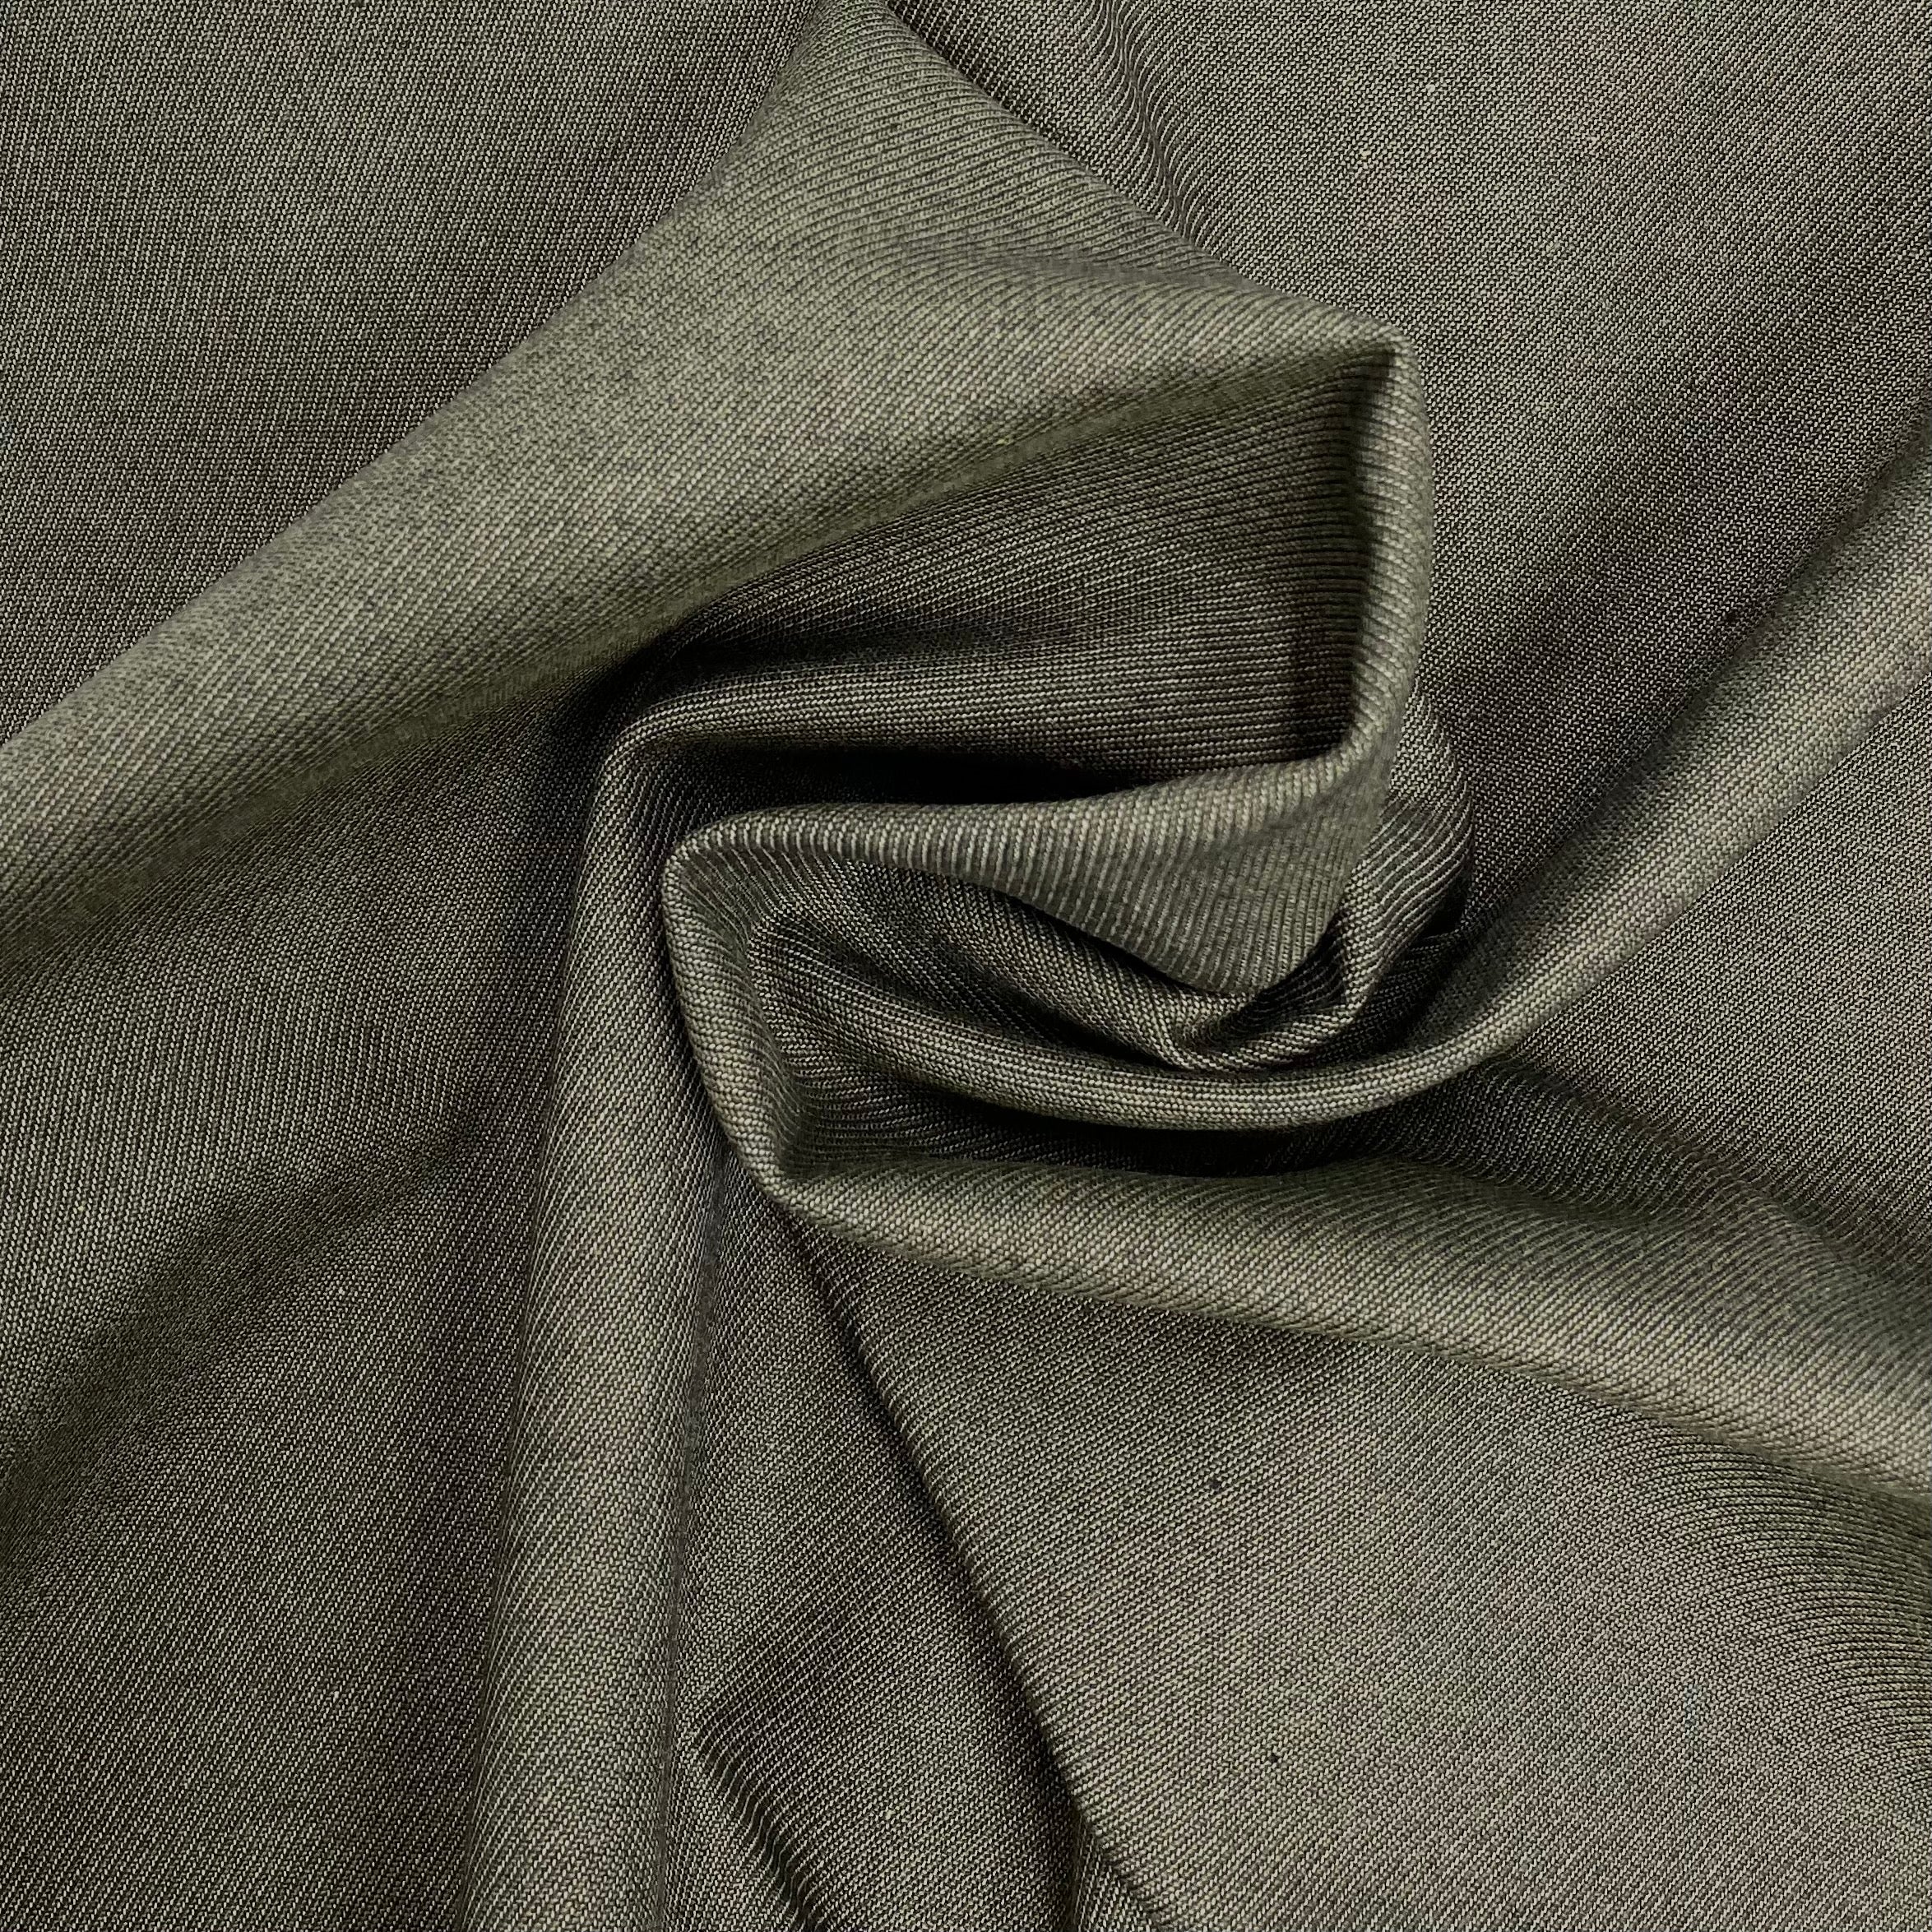 0.45m Remnant of Bayleaf Cotton Stretch Fabric